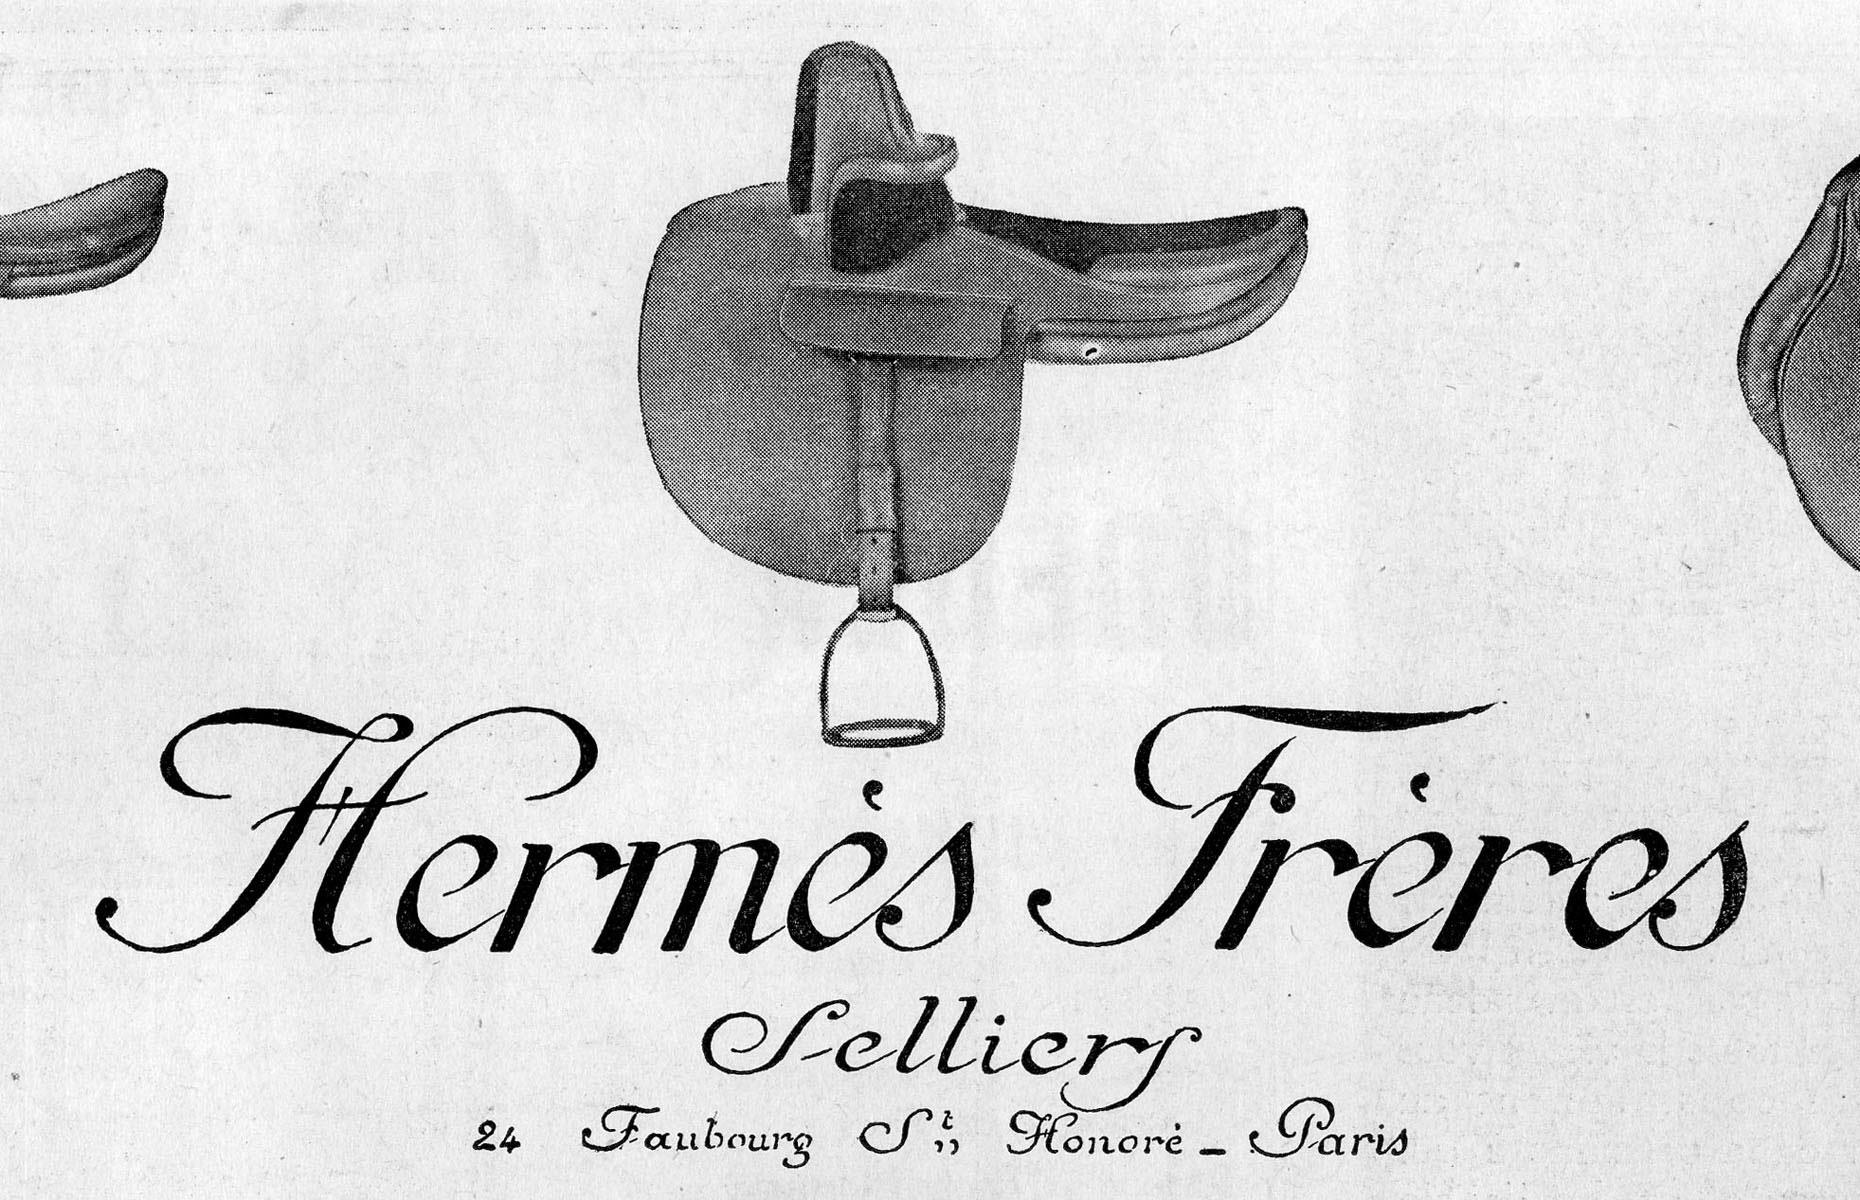 Hermès started out as a harness workshop 